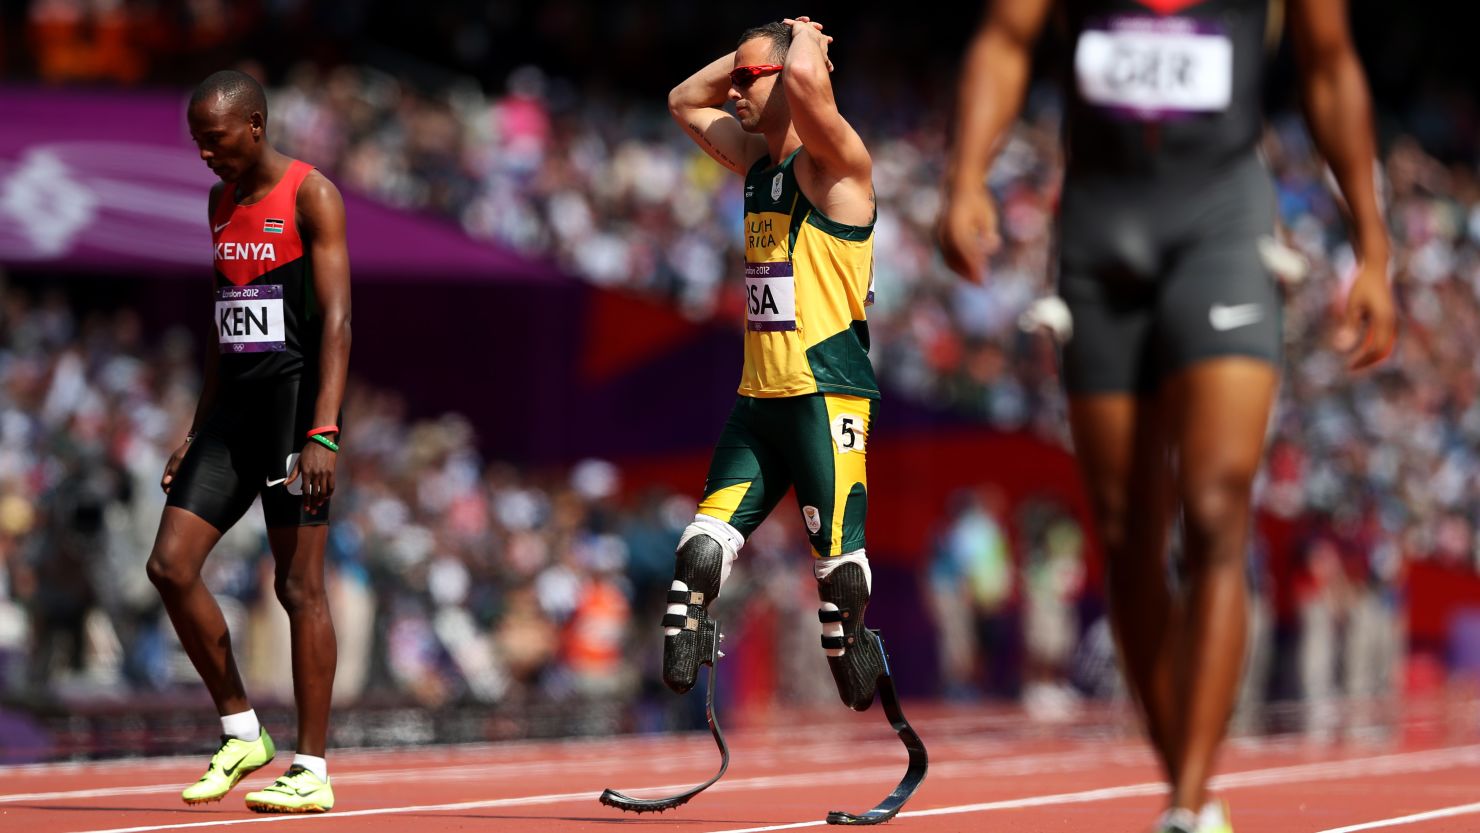 Oscar Pistorius pictured during the relay in the London 2012 Olympics.